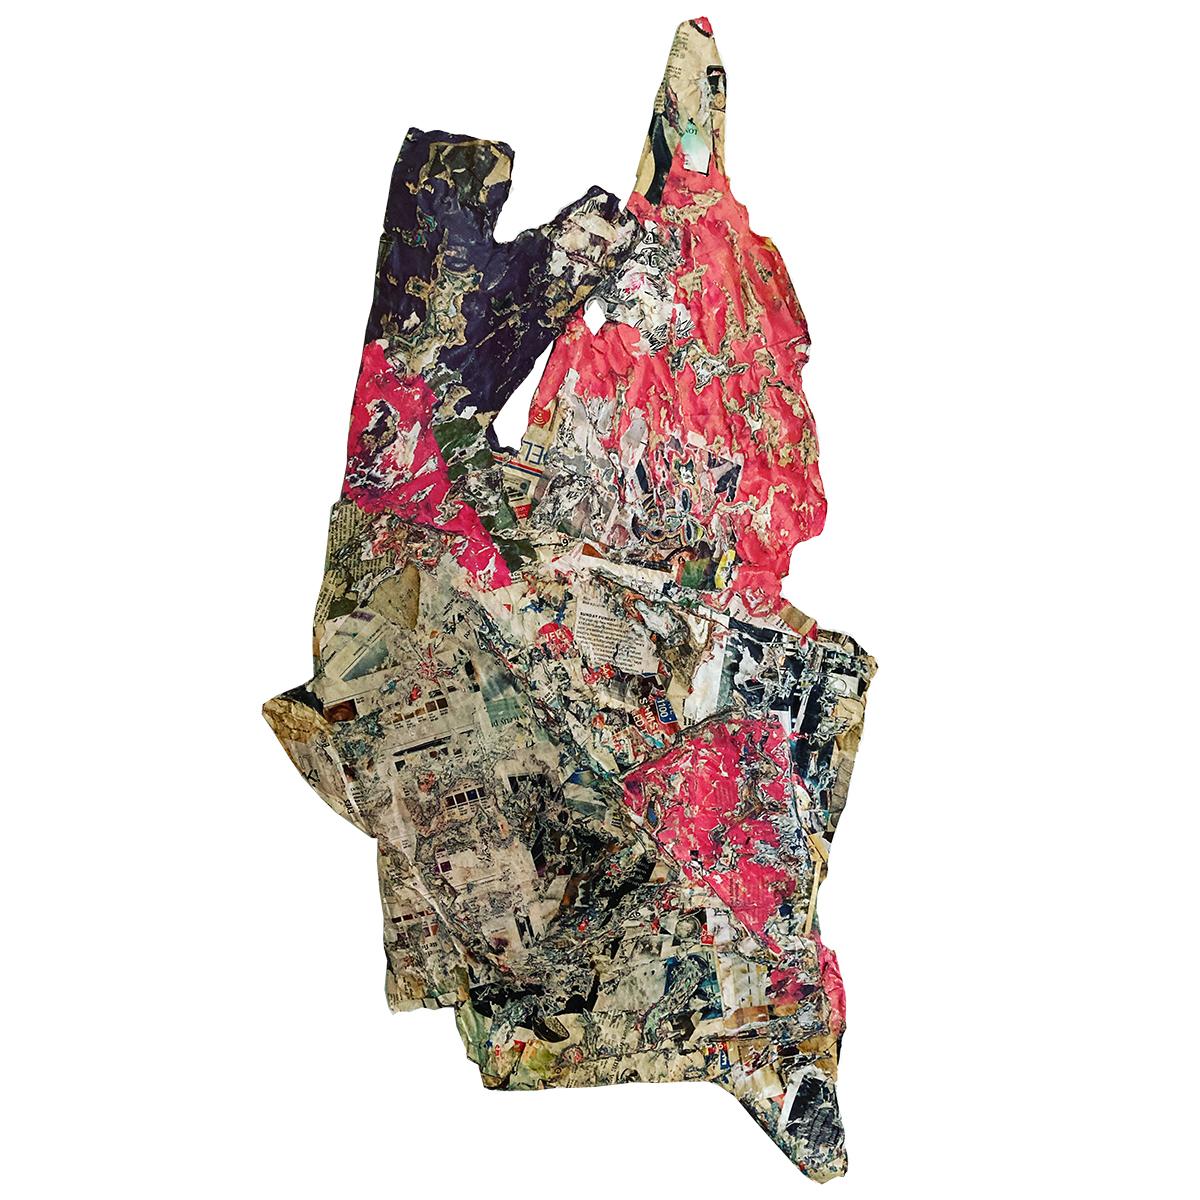 Brent Fogt Abstract Sculpture – ""High Plains" Rot und Dunkel Lila Abstrakte Mixed Media Skulpturale Collage